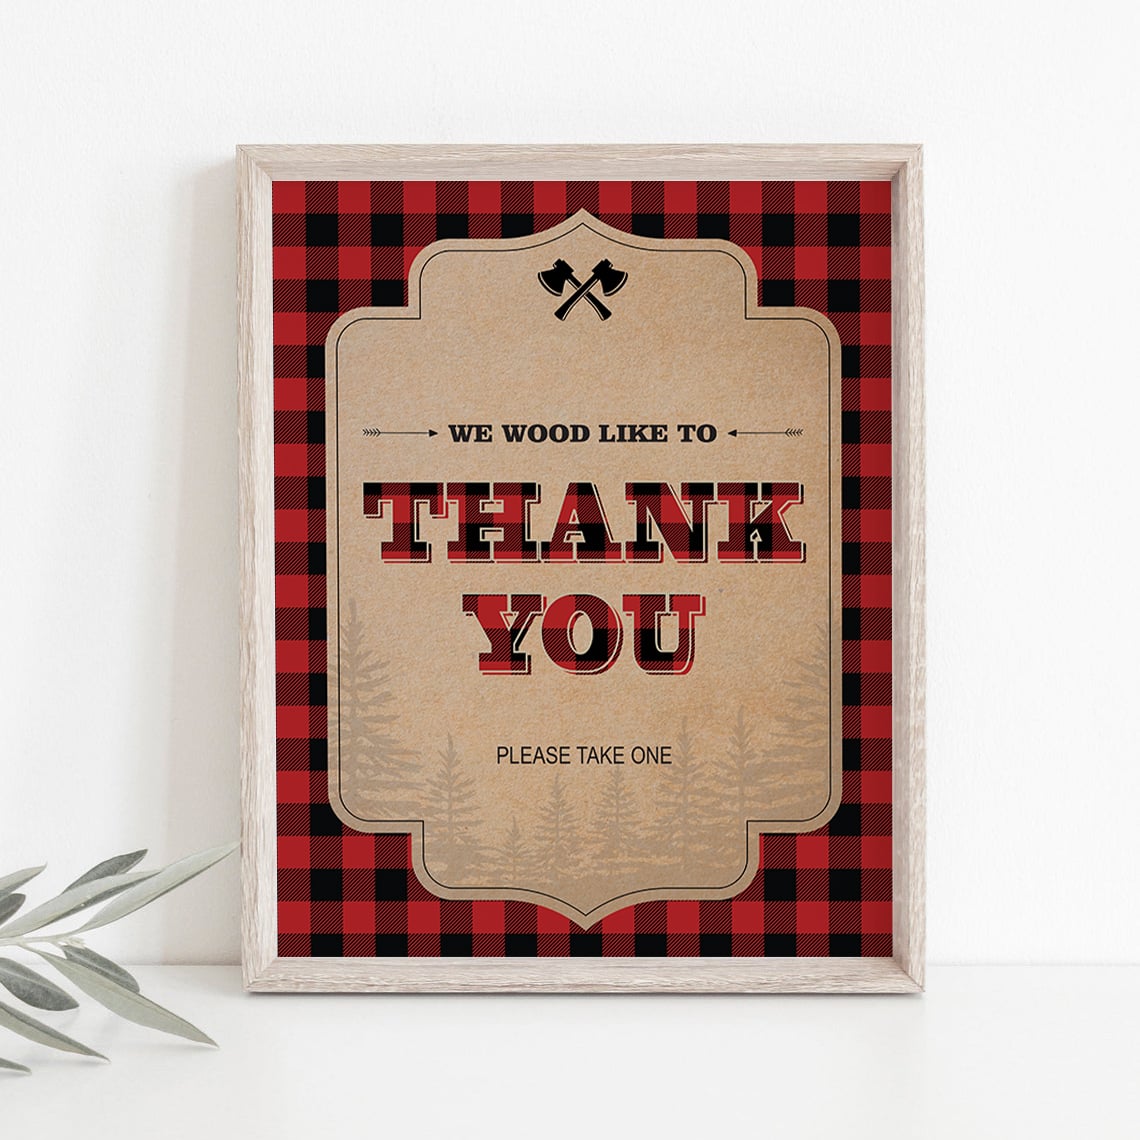 We wood like to say thank you for coming sign by LittleSizzle